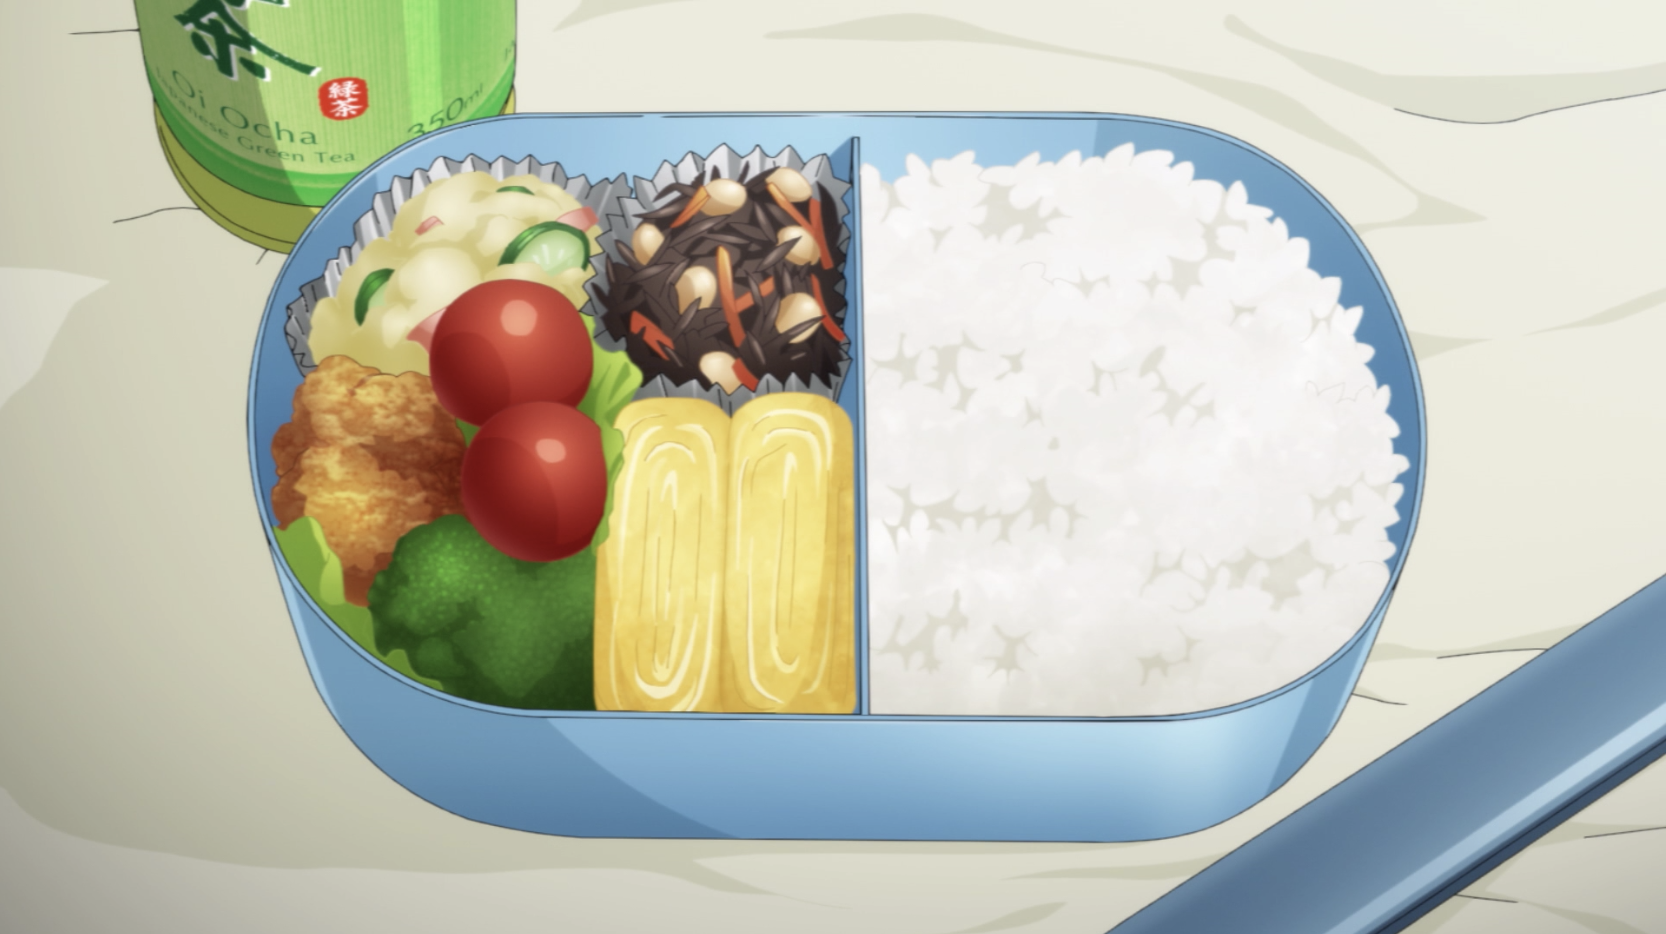 A bento; this one is filled with rice, an omelette, a salad and some other sides